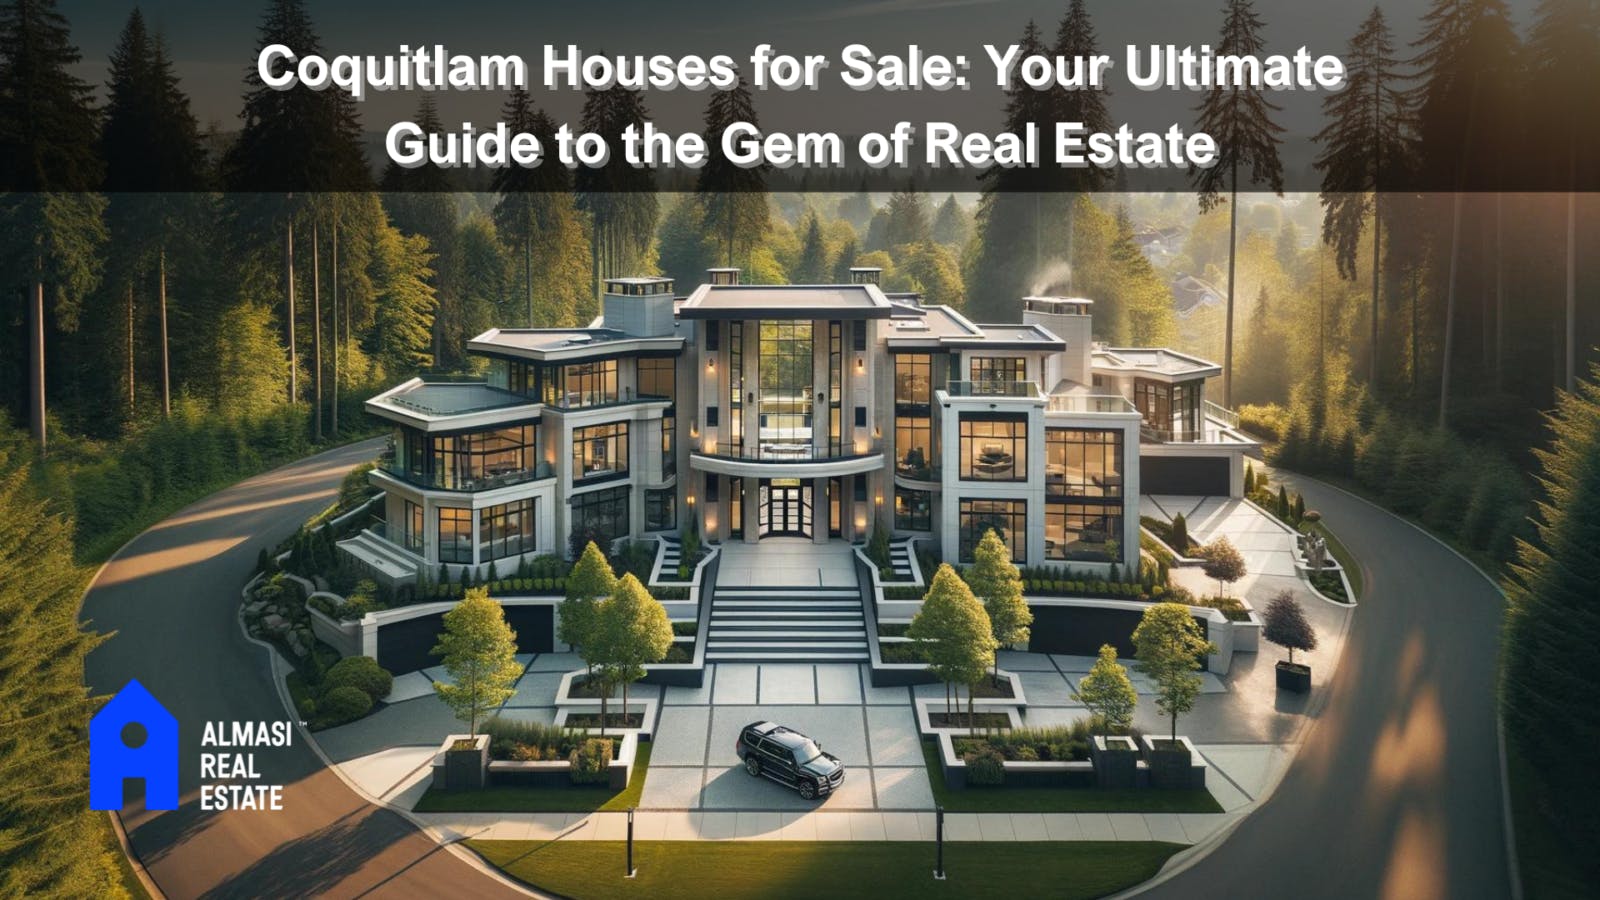 Coquitlam Houses for Sale: Your Ultimate Guide to the Gem of Real Estate